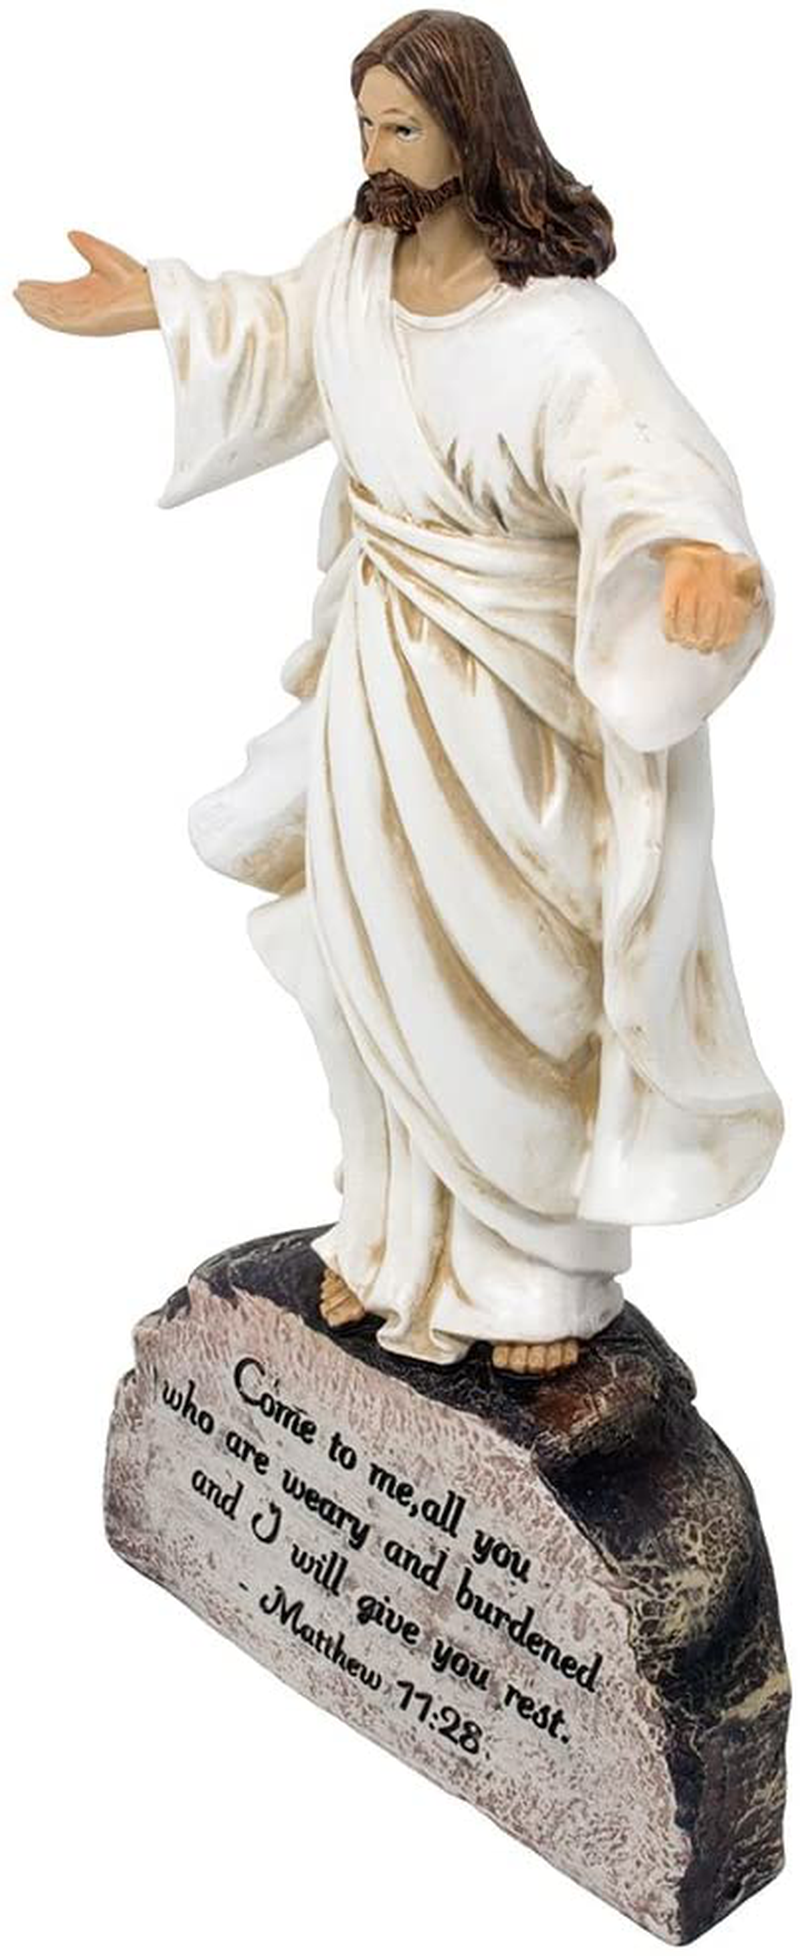 Decorative Jesus Standing on Rock Statue with Inspirational Bible Verse for Christian Home Décor Sculptures and Figurines As Spiritual Shelf Decorations Or Religious Gifts for Christmas and Easter